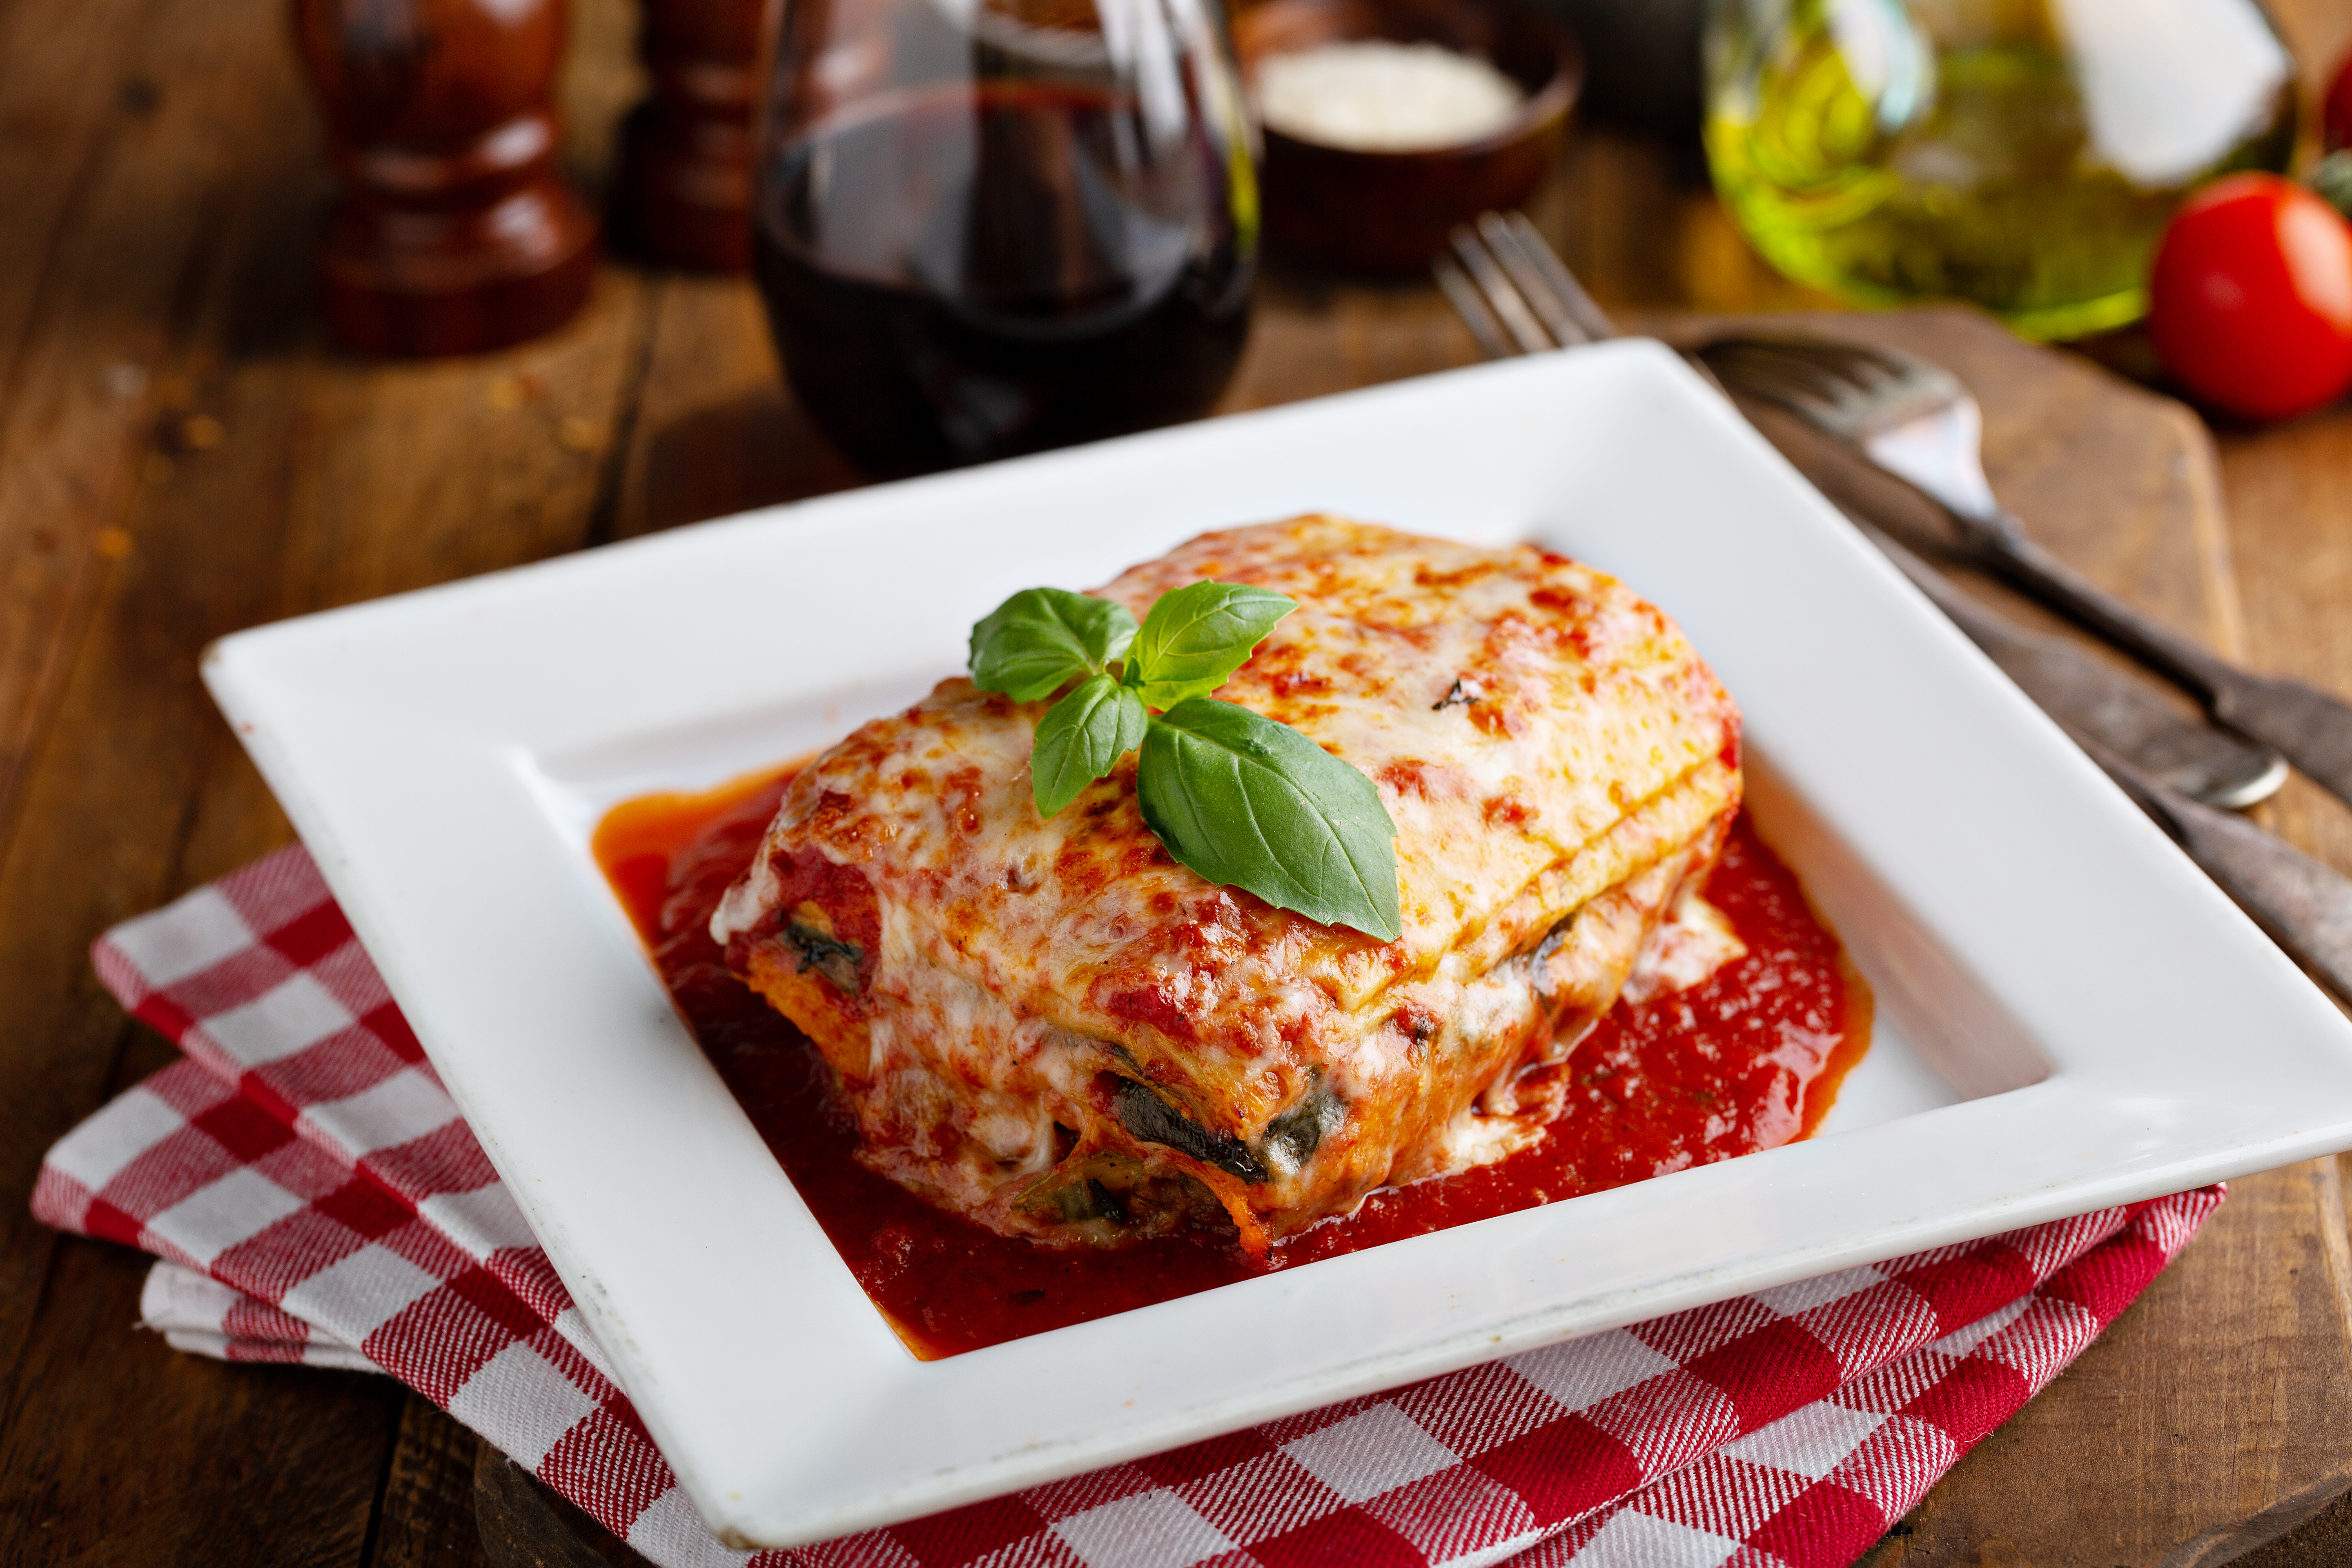 A slice of lasagna garnished with basil leaves sits in a square white dish atop a red-and-white checkered napkin.